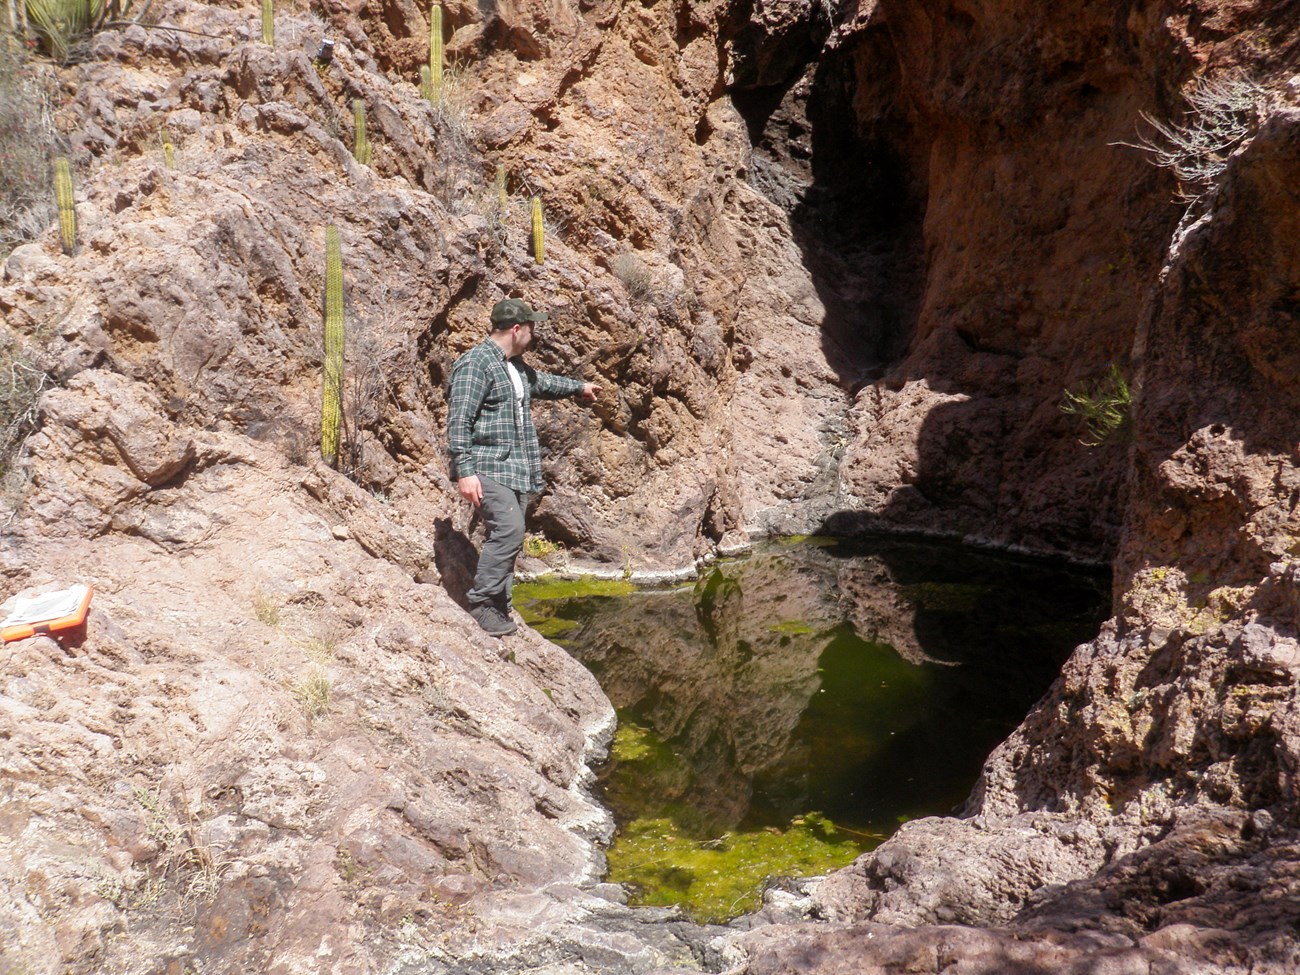 A man stands on the edge of a pool of water pointing to the other end of it. The water has bright green algae floating on top. Saguaro grow on the rock near it.